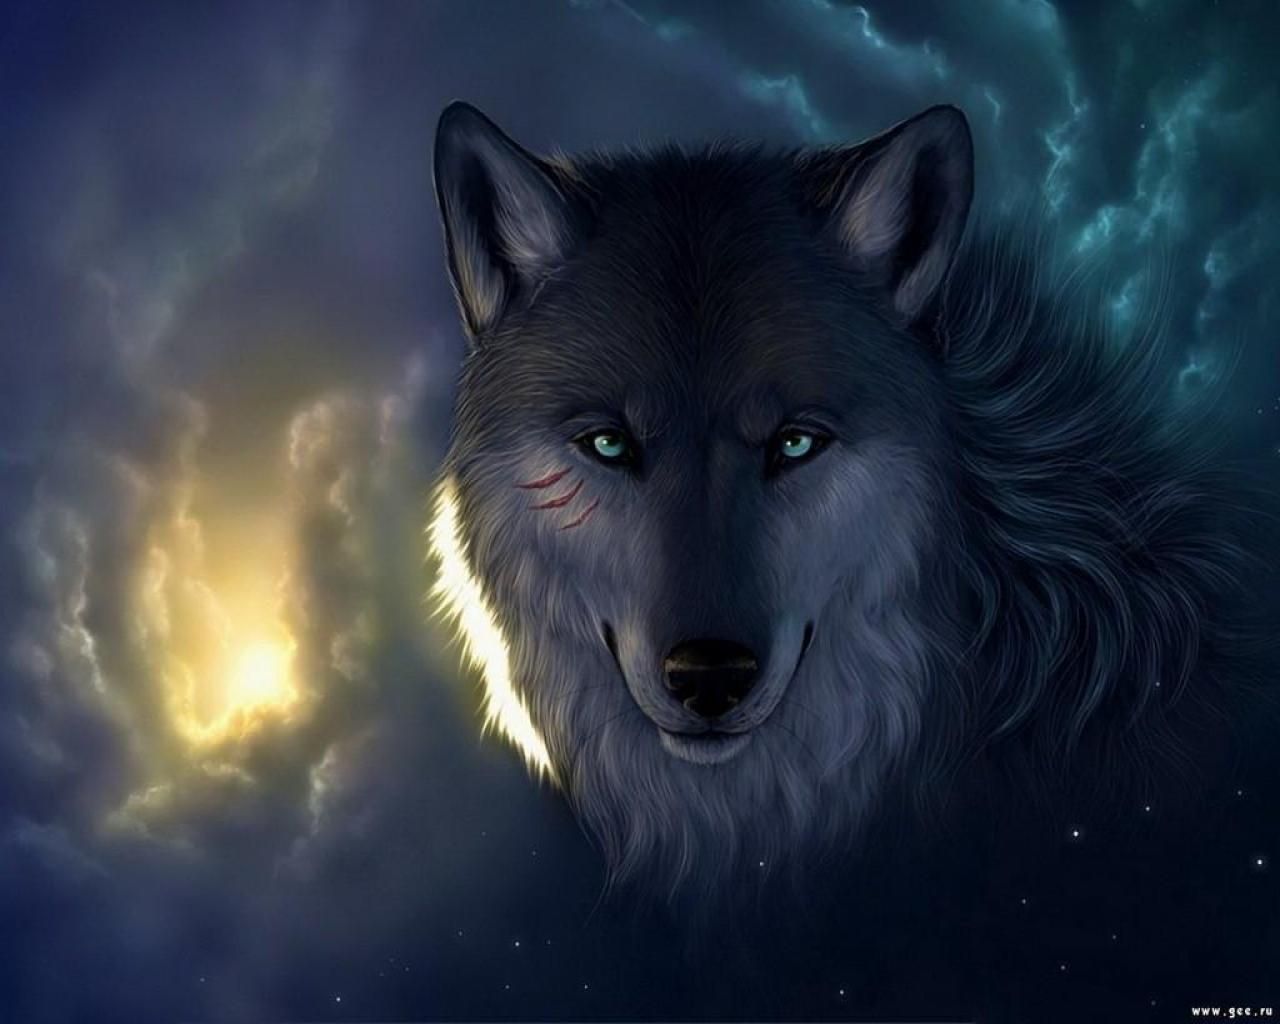 Free Wolf Gallery. ., Wolf in the Wild Background, Wolf in the Wild Free HD Wallpaper. Animal spirit guides, Wolf wallpaper, Wolf picture